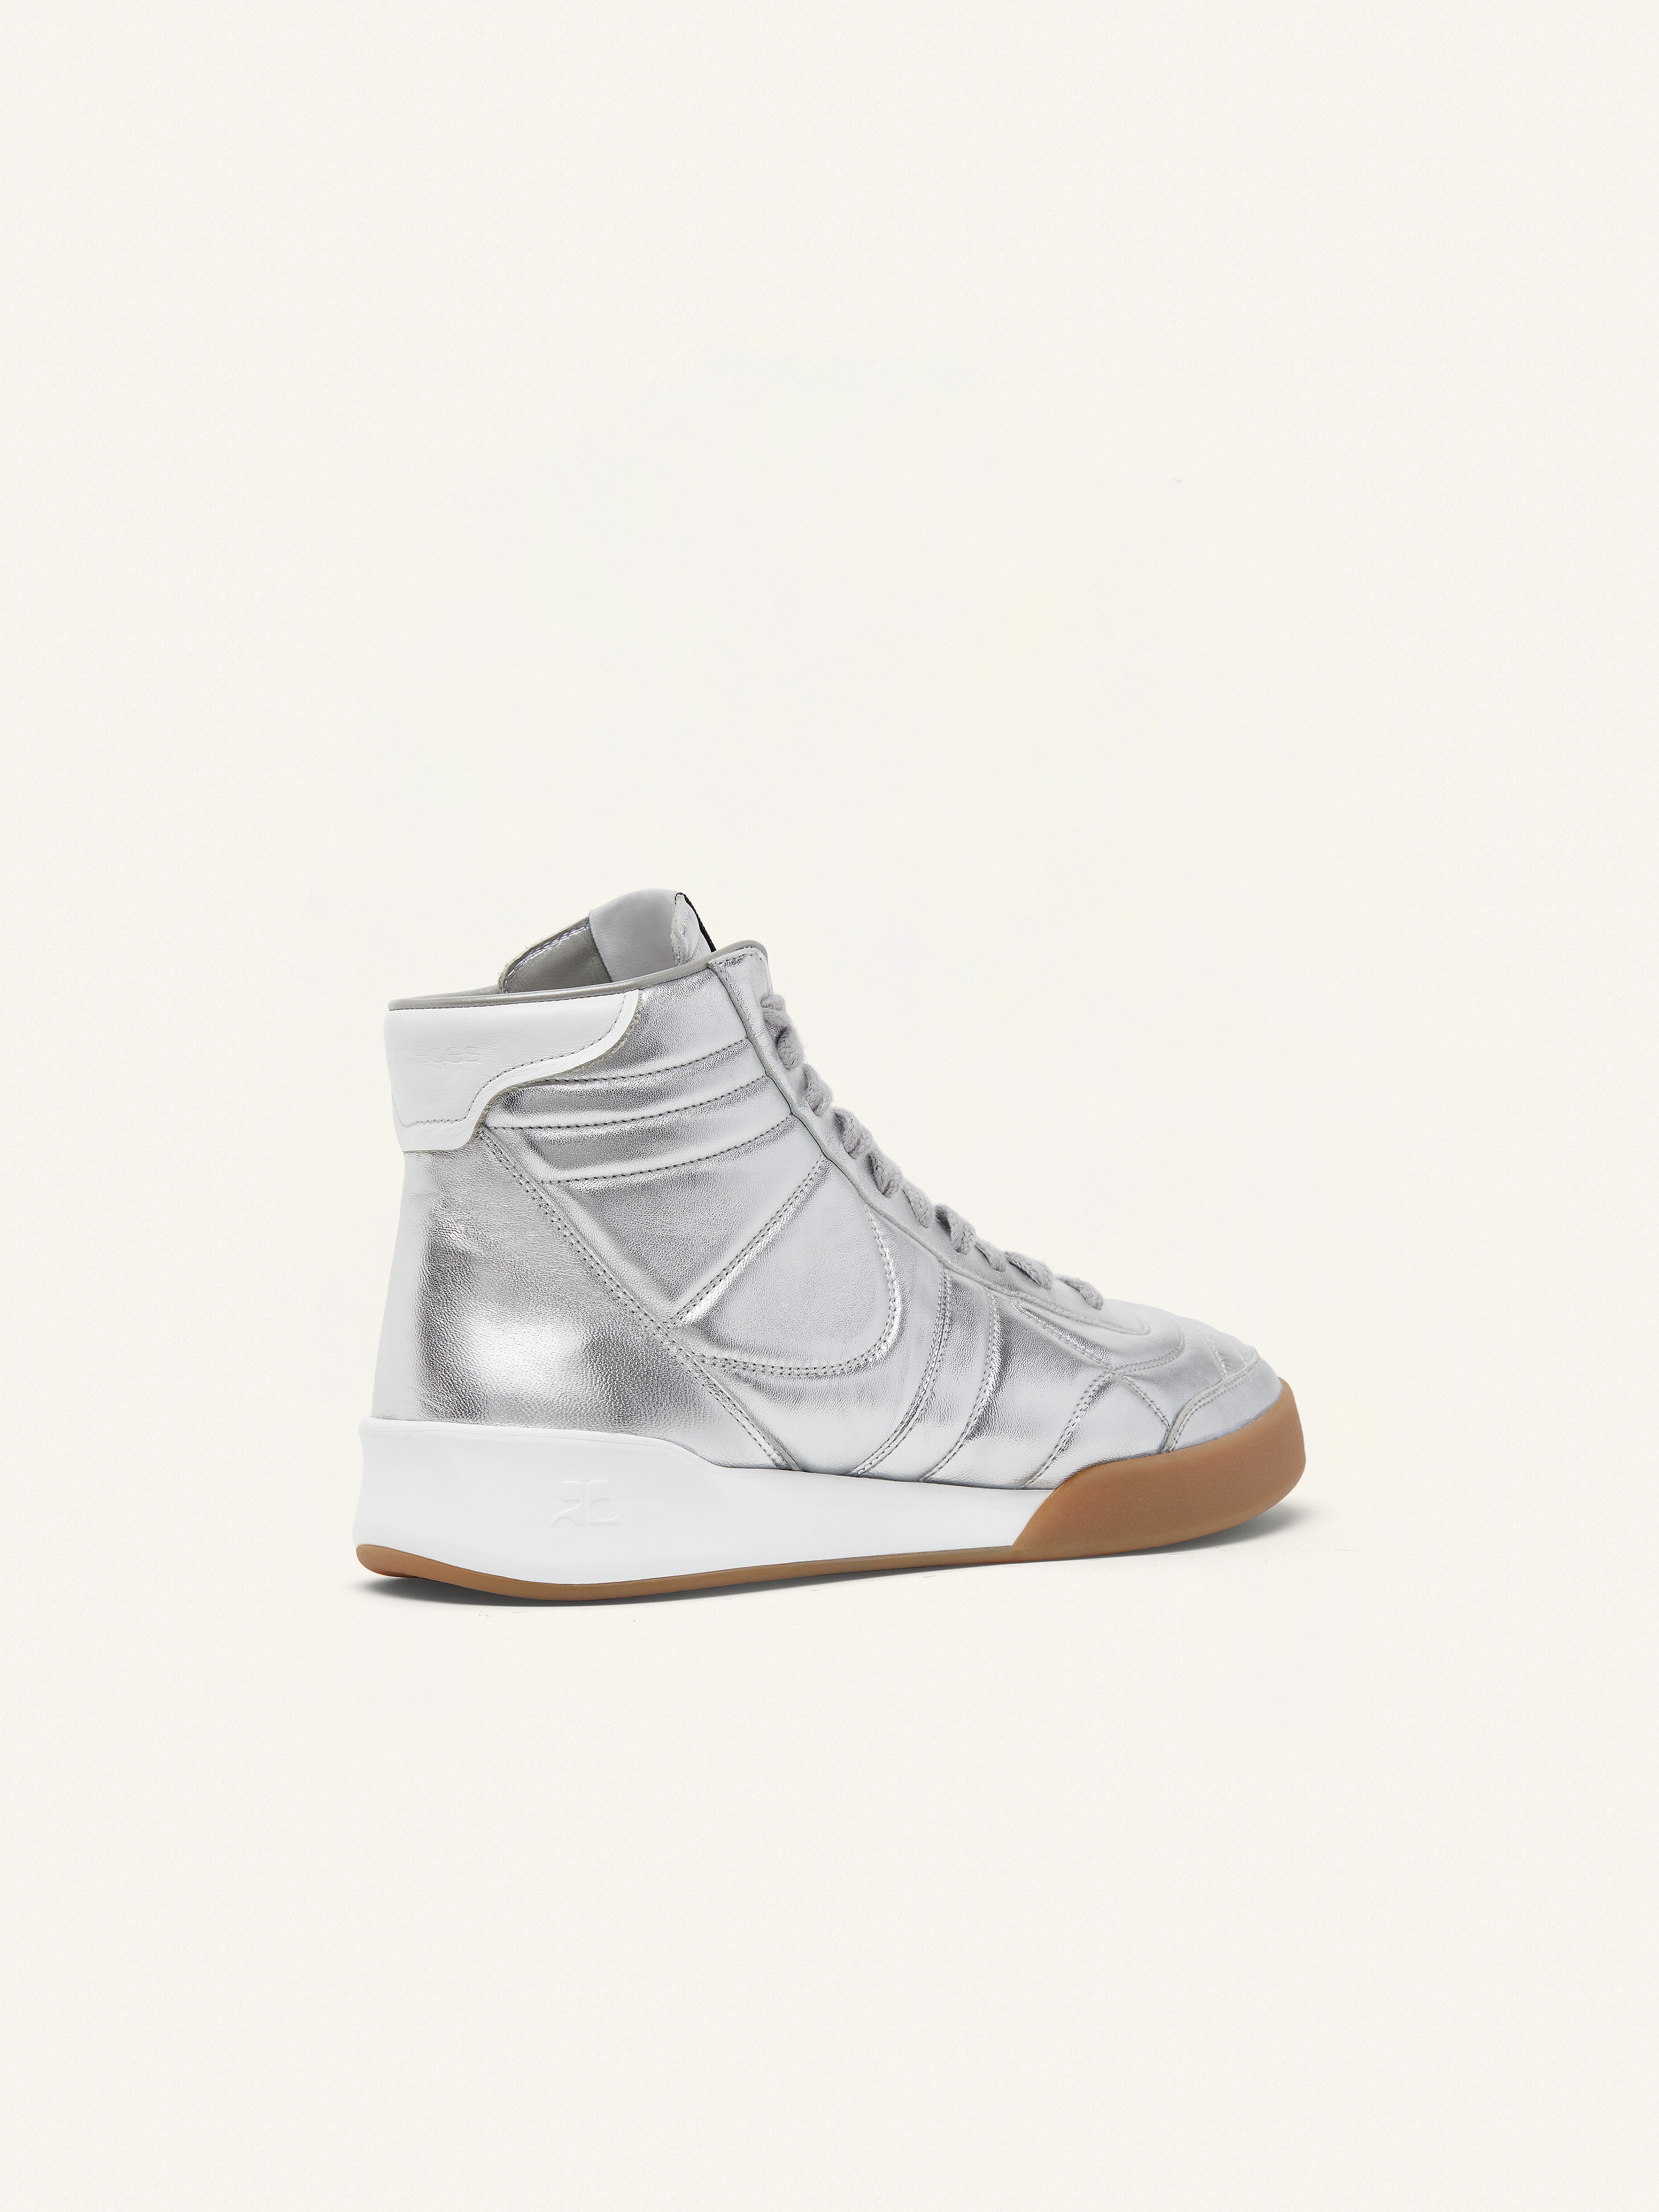 CLUB02 MID SILVER LEATHER SNEAKERS - 3